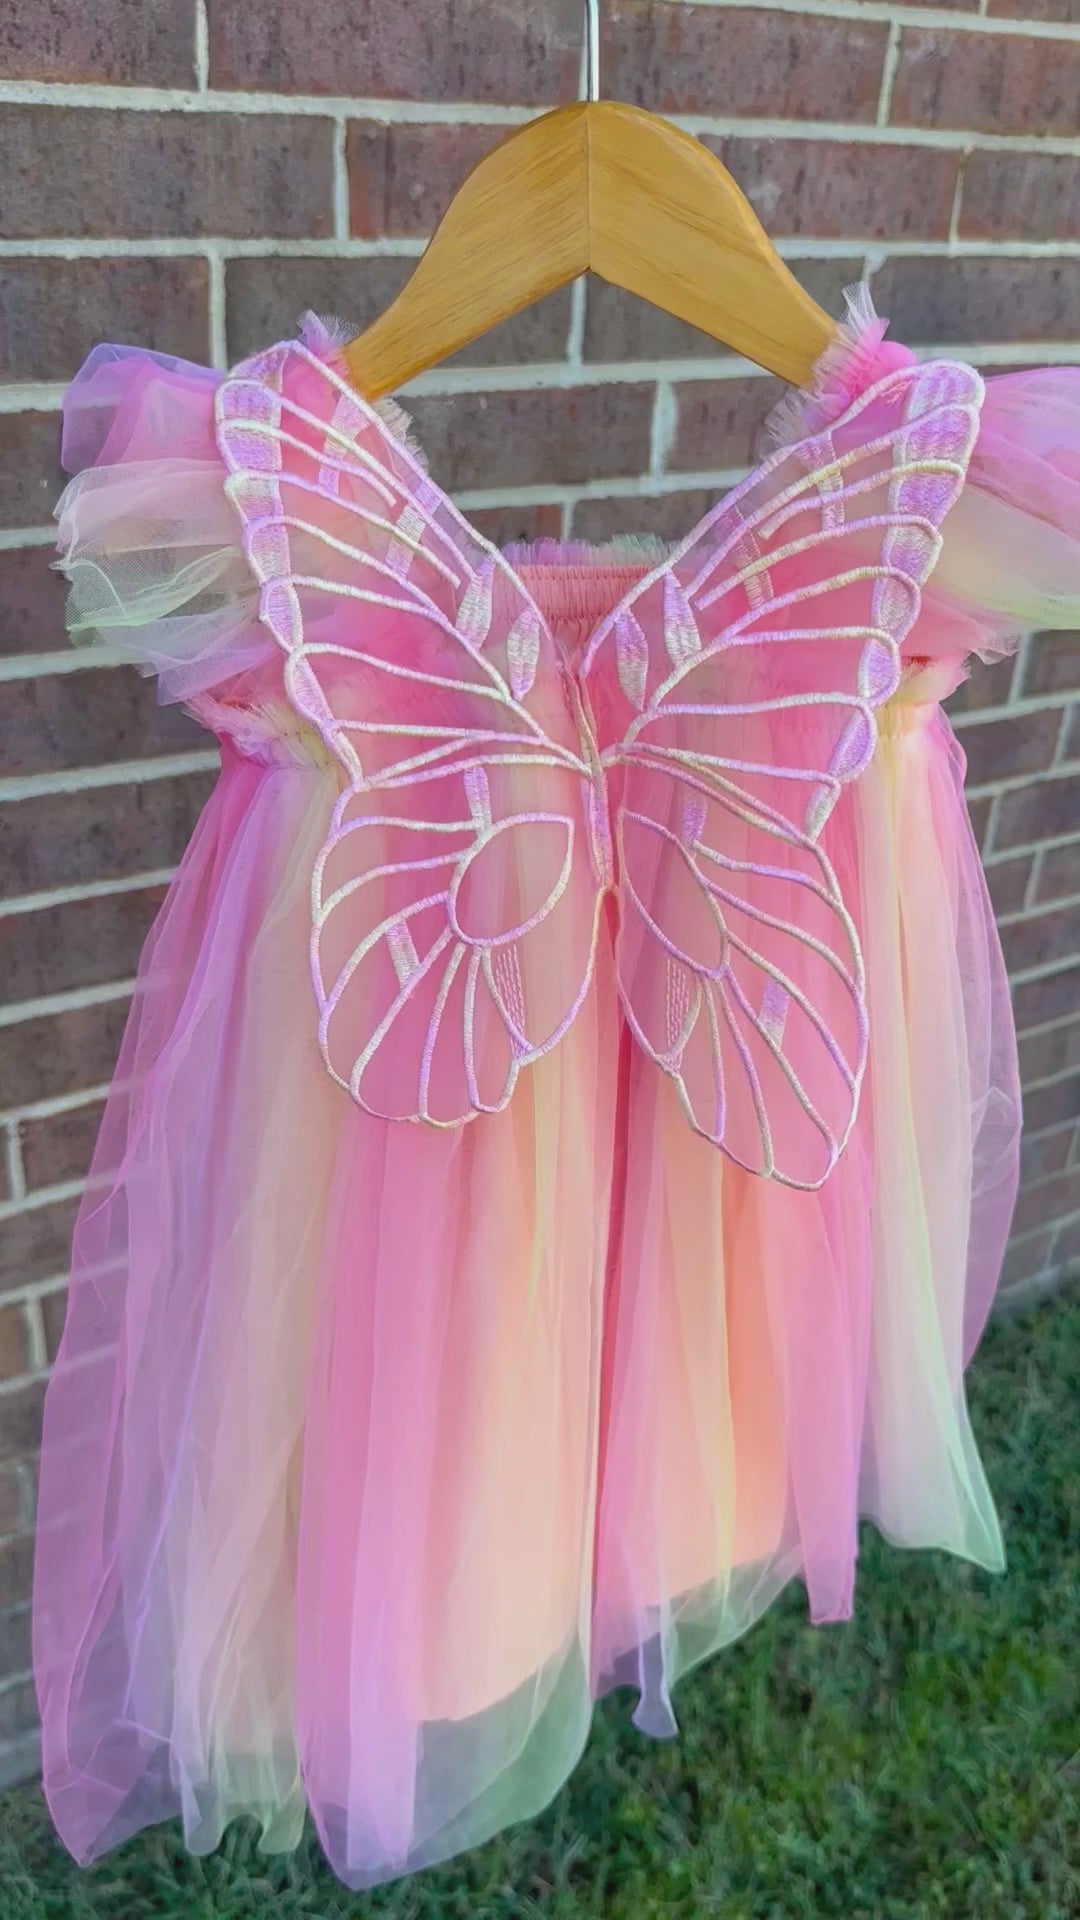 Peachy rainbow fairy peach, lilac purple, coral, pale yellow knee length tulle dress with iridescent butterfly wings attached for toddlers, babies, kids.